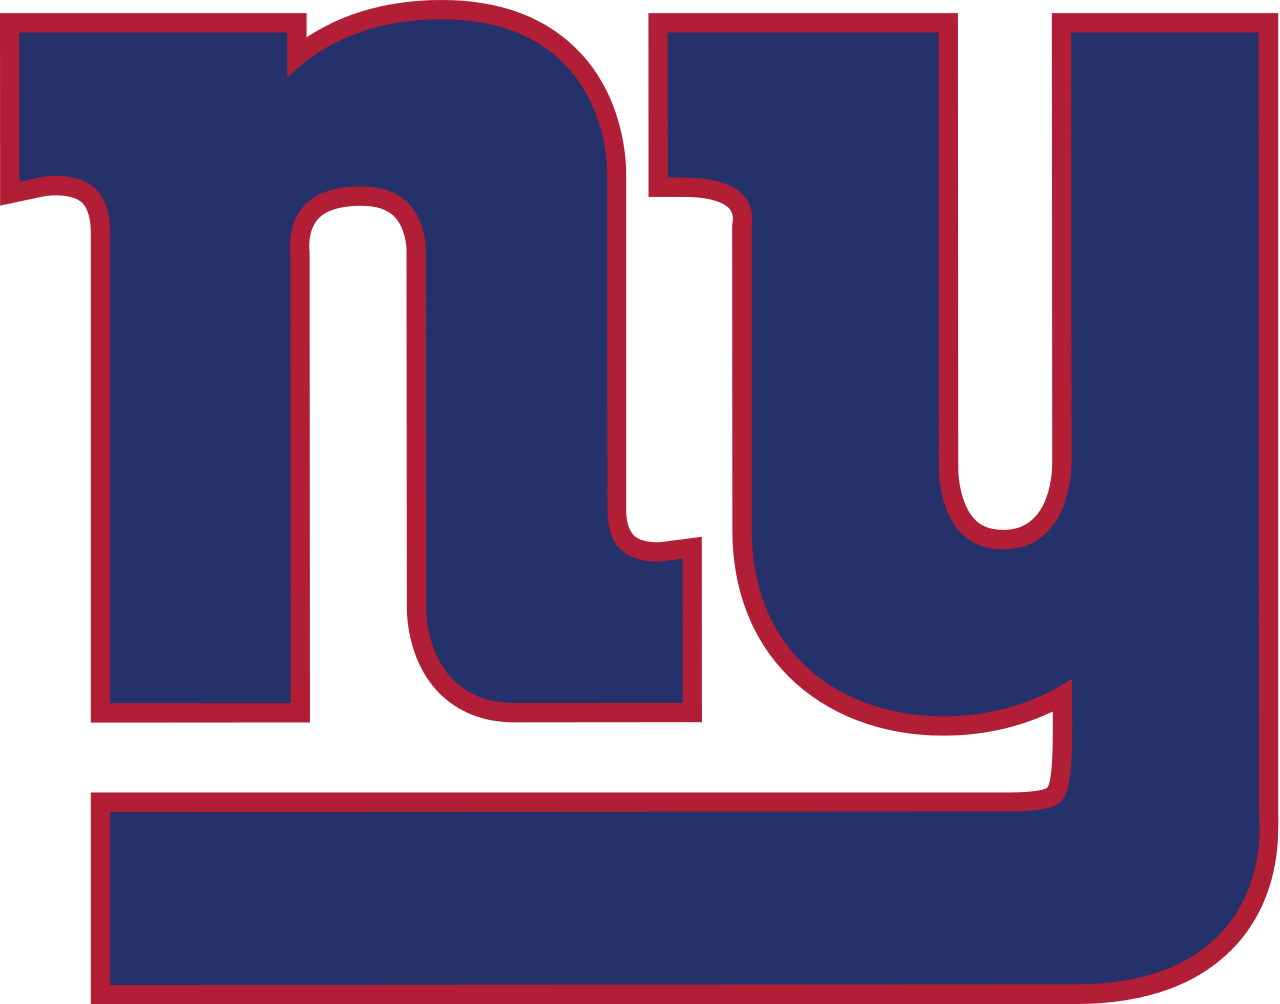 It's Only One Game - NY Giants